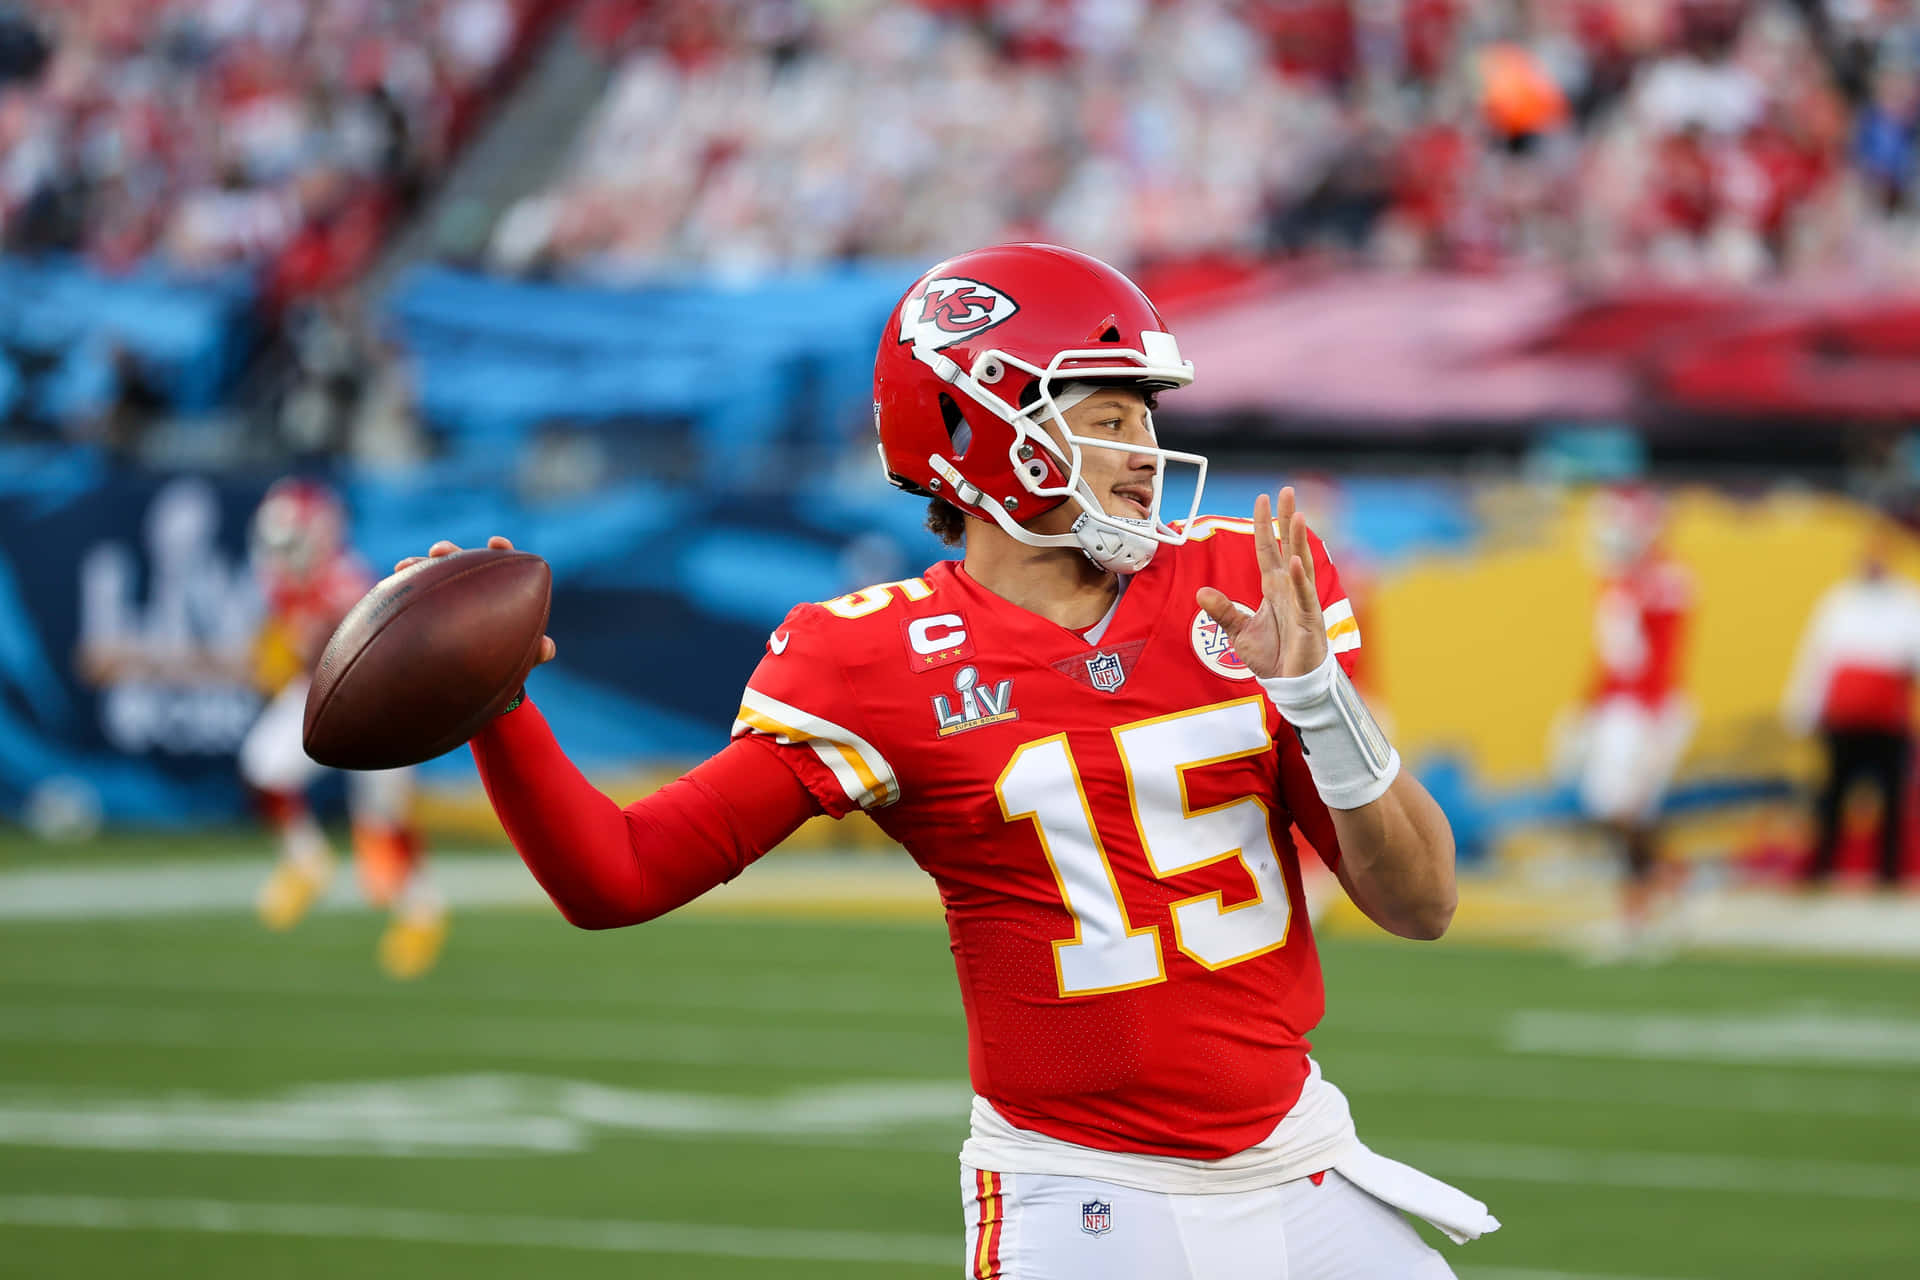 Patrick Mahomes in action on the field.